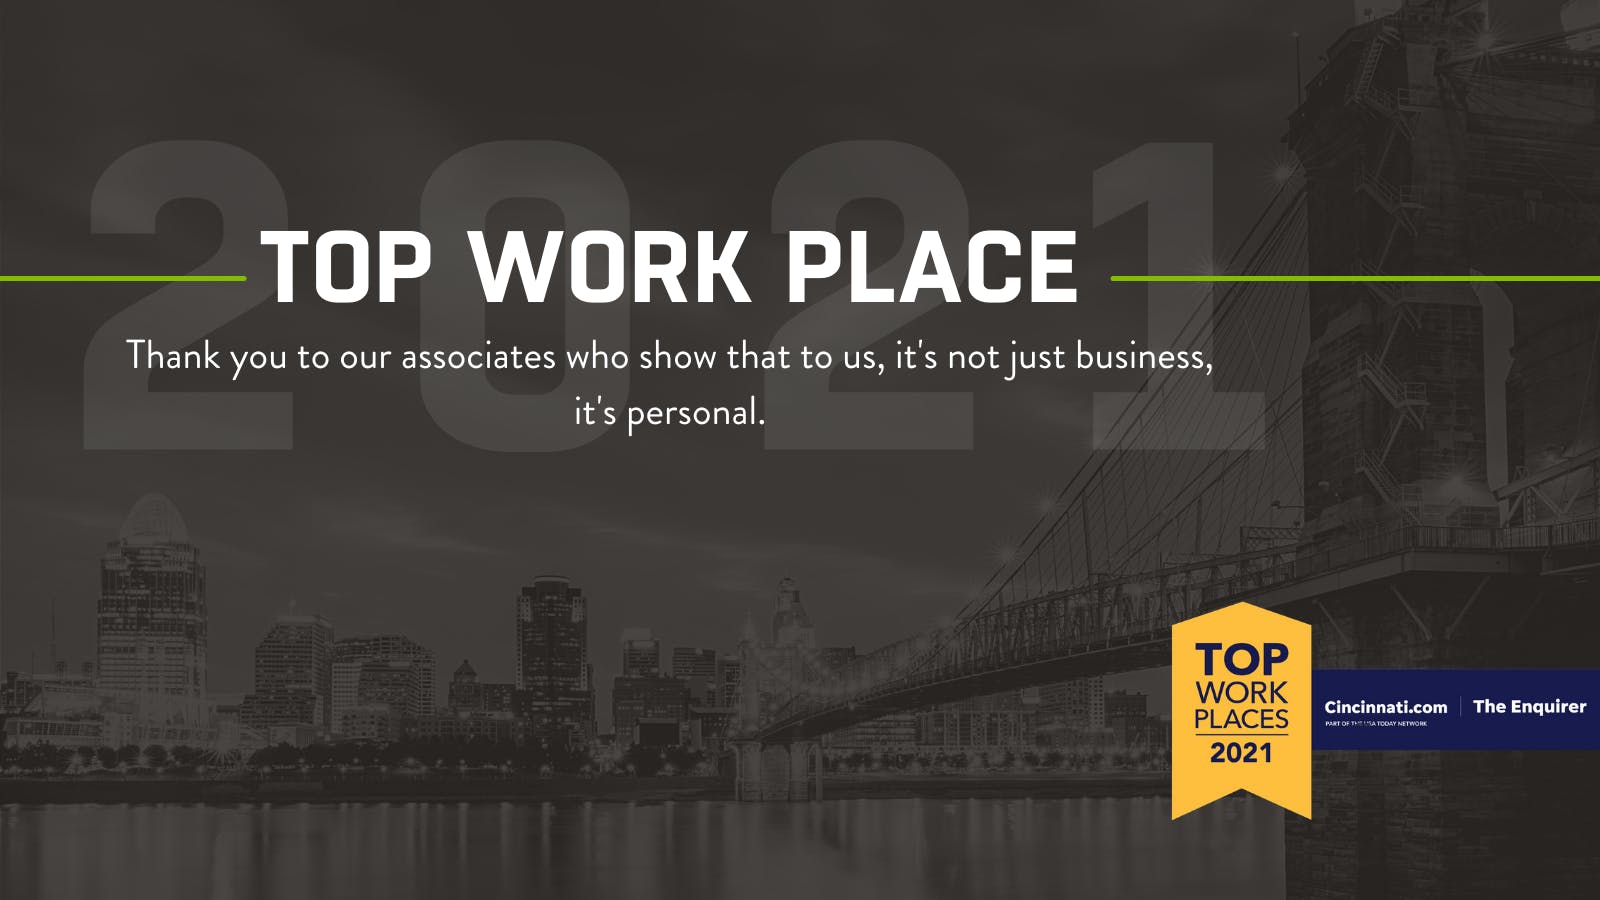 Mike Albert named a Top Work Place for 2021